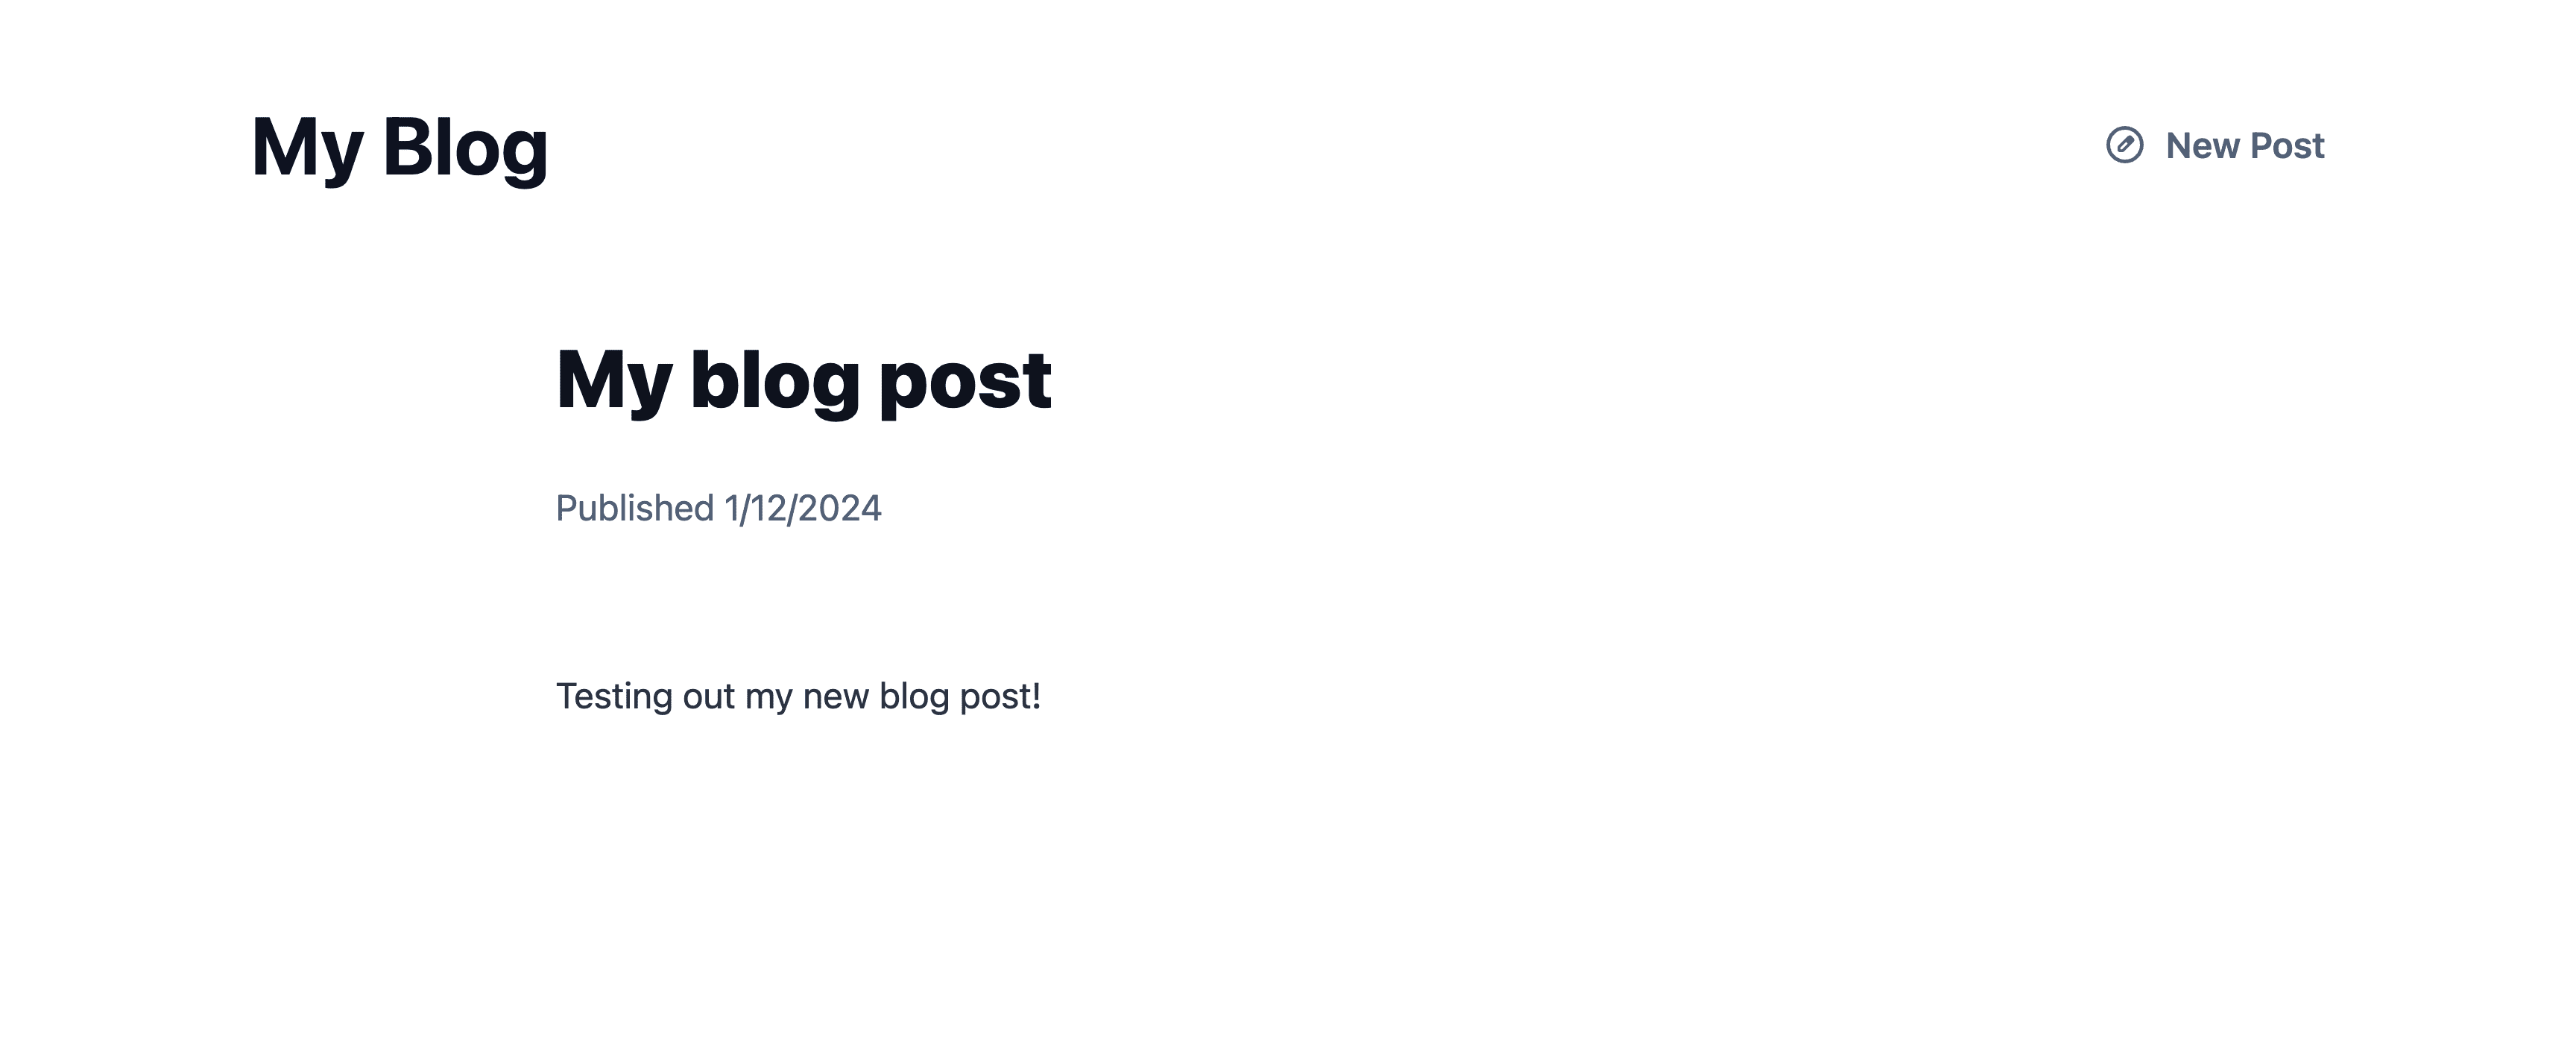 Displaying a single post from the blog